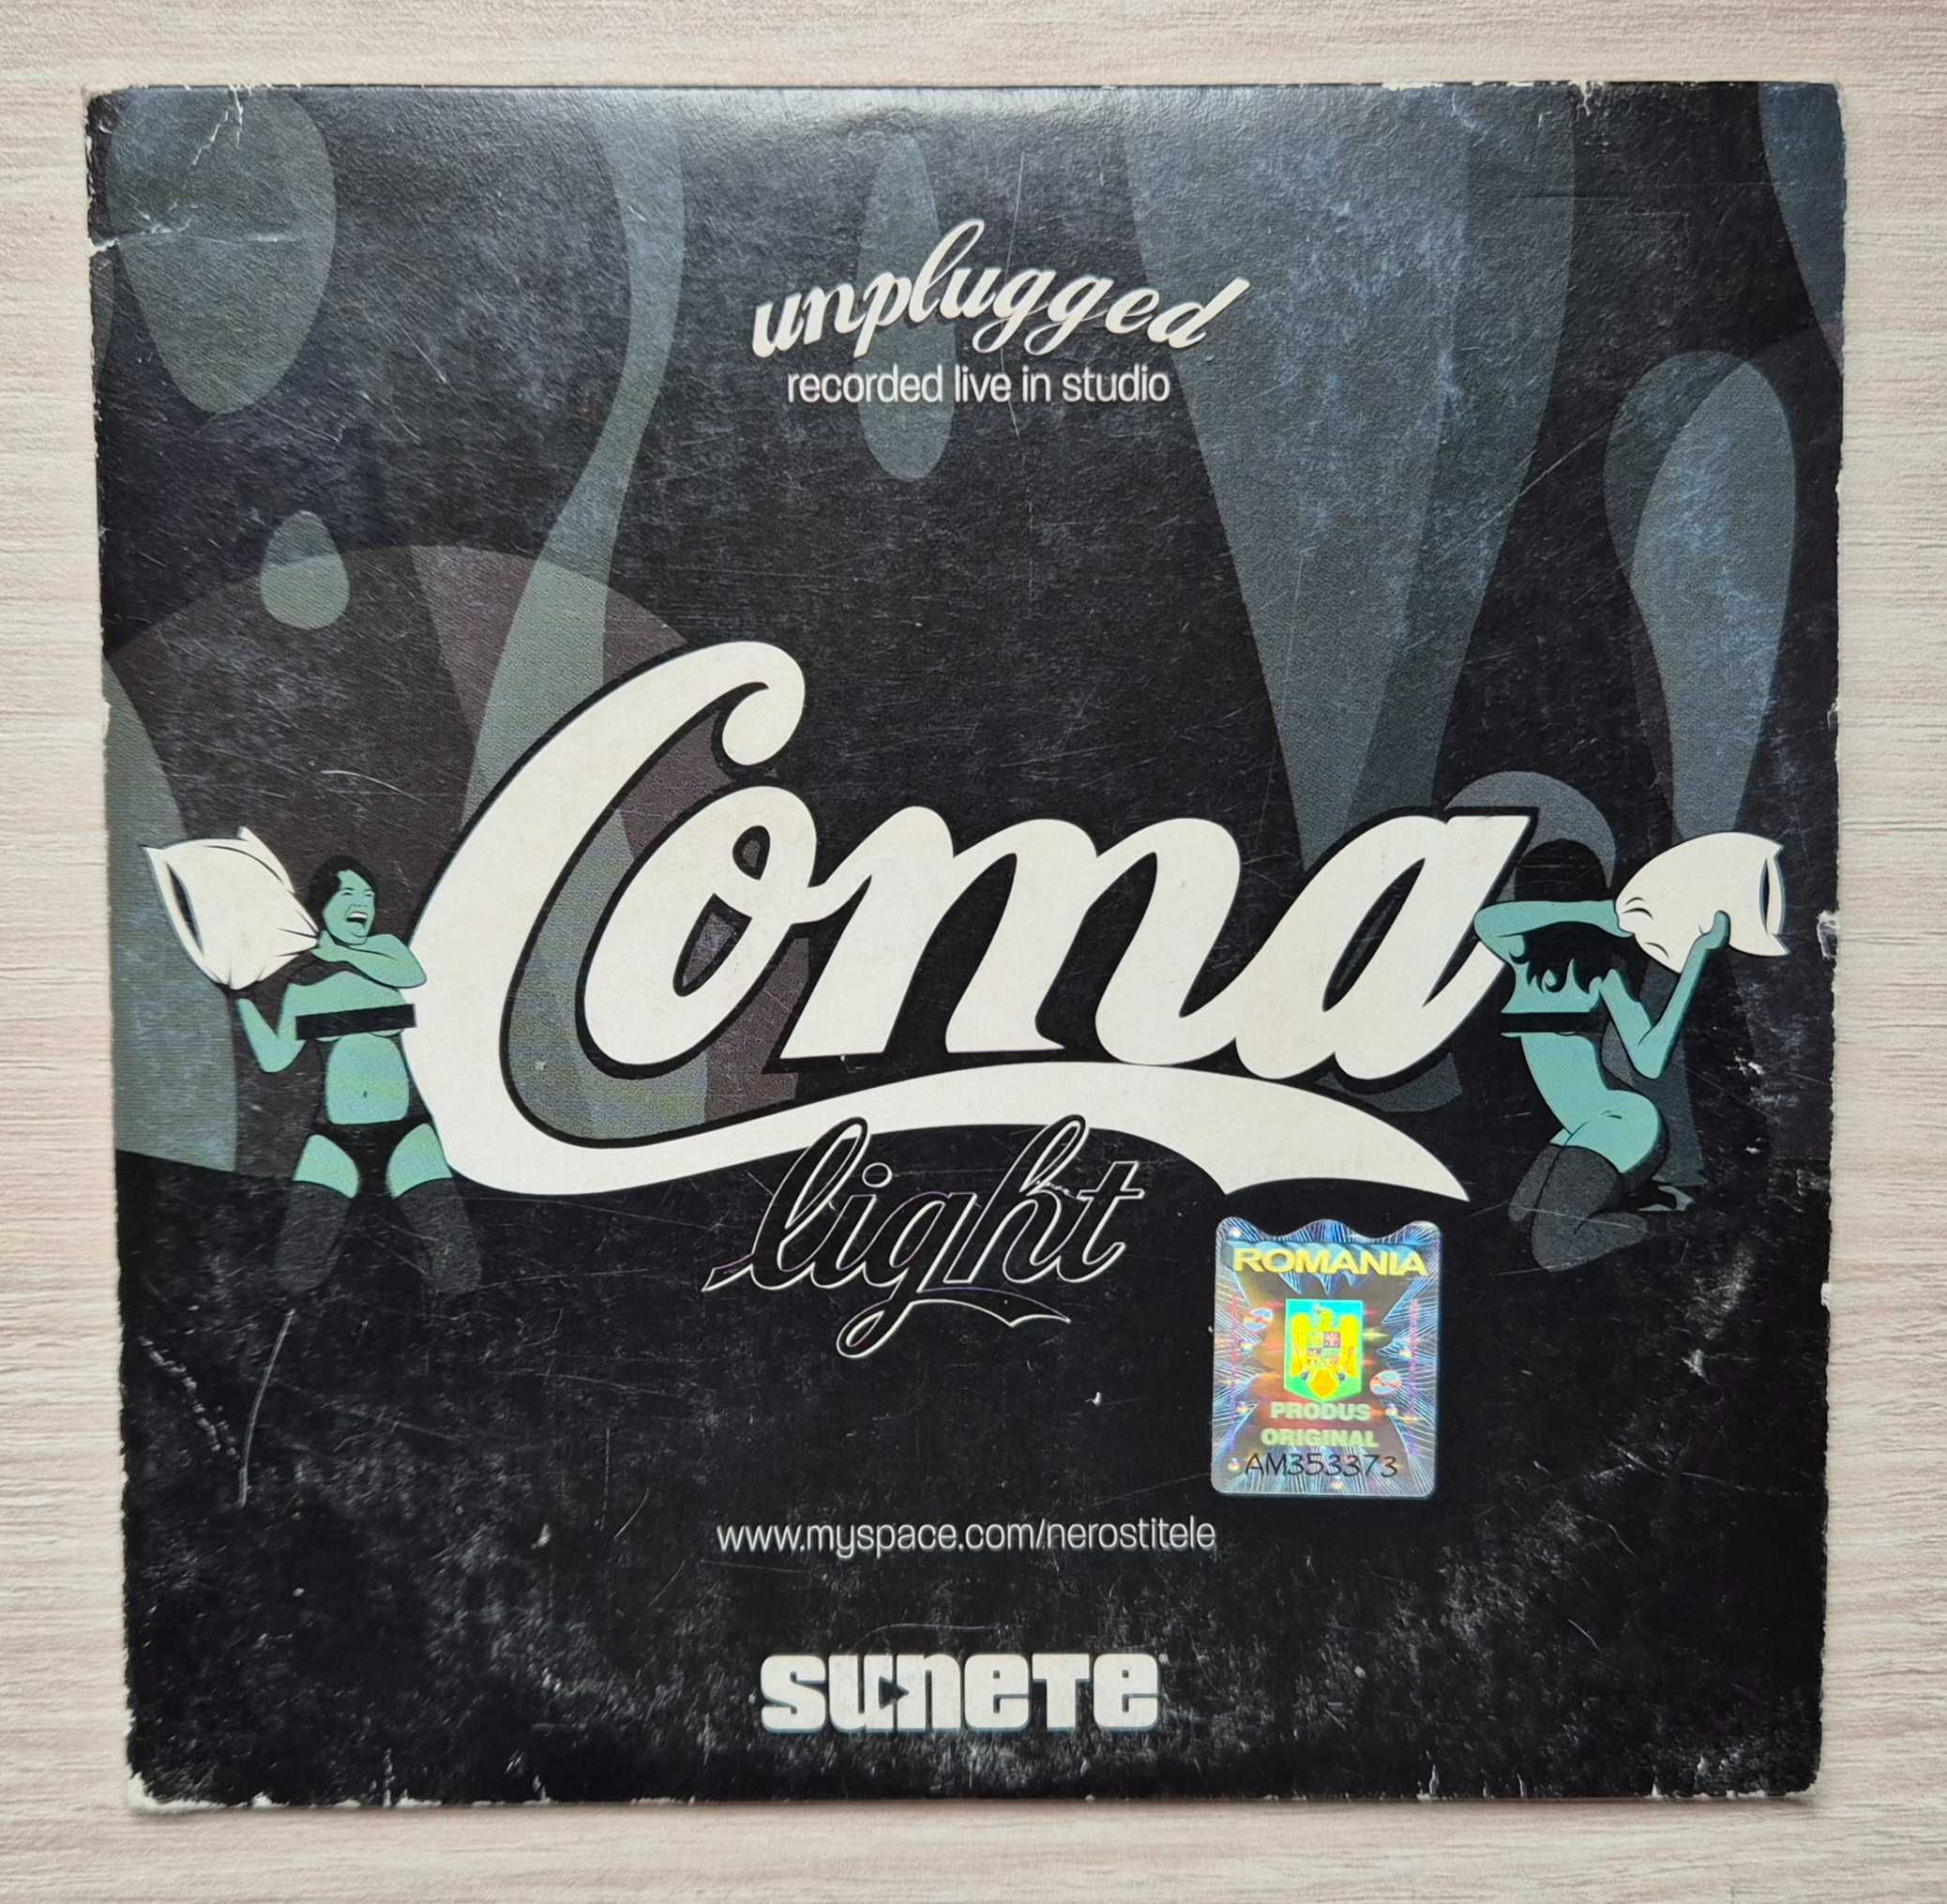 Coma Light – Unplugged (Recorded Live In Studio) - CD